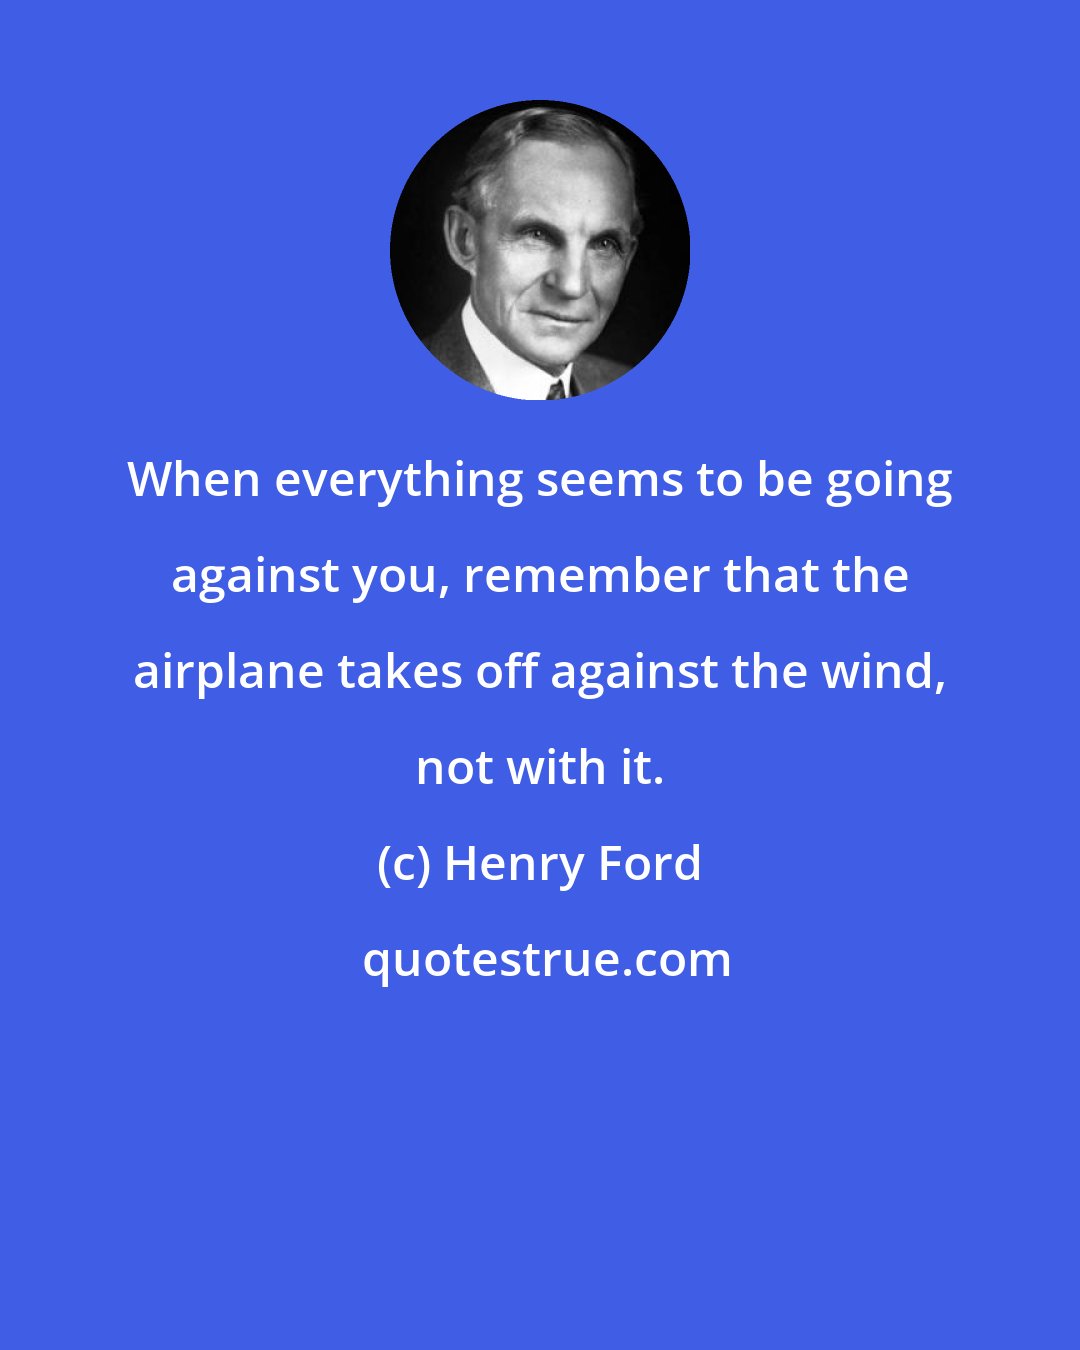 Henry Ford: When everything seems to be going against you, remember that the airplane takes off against the wind, not with it.